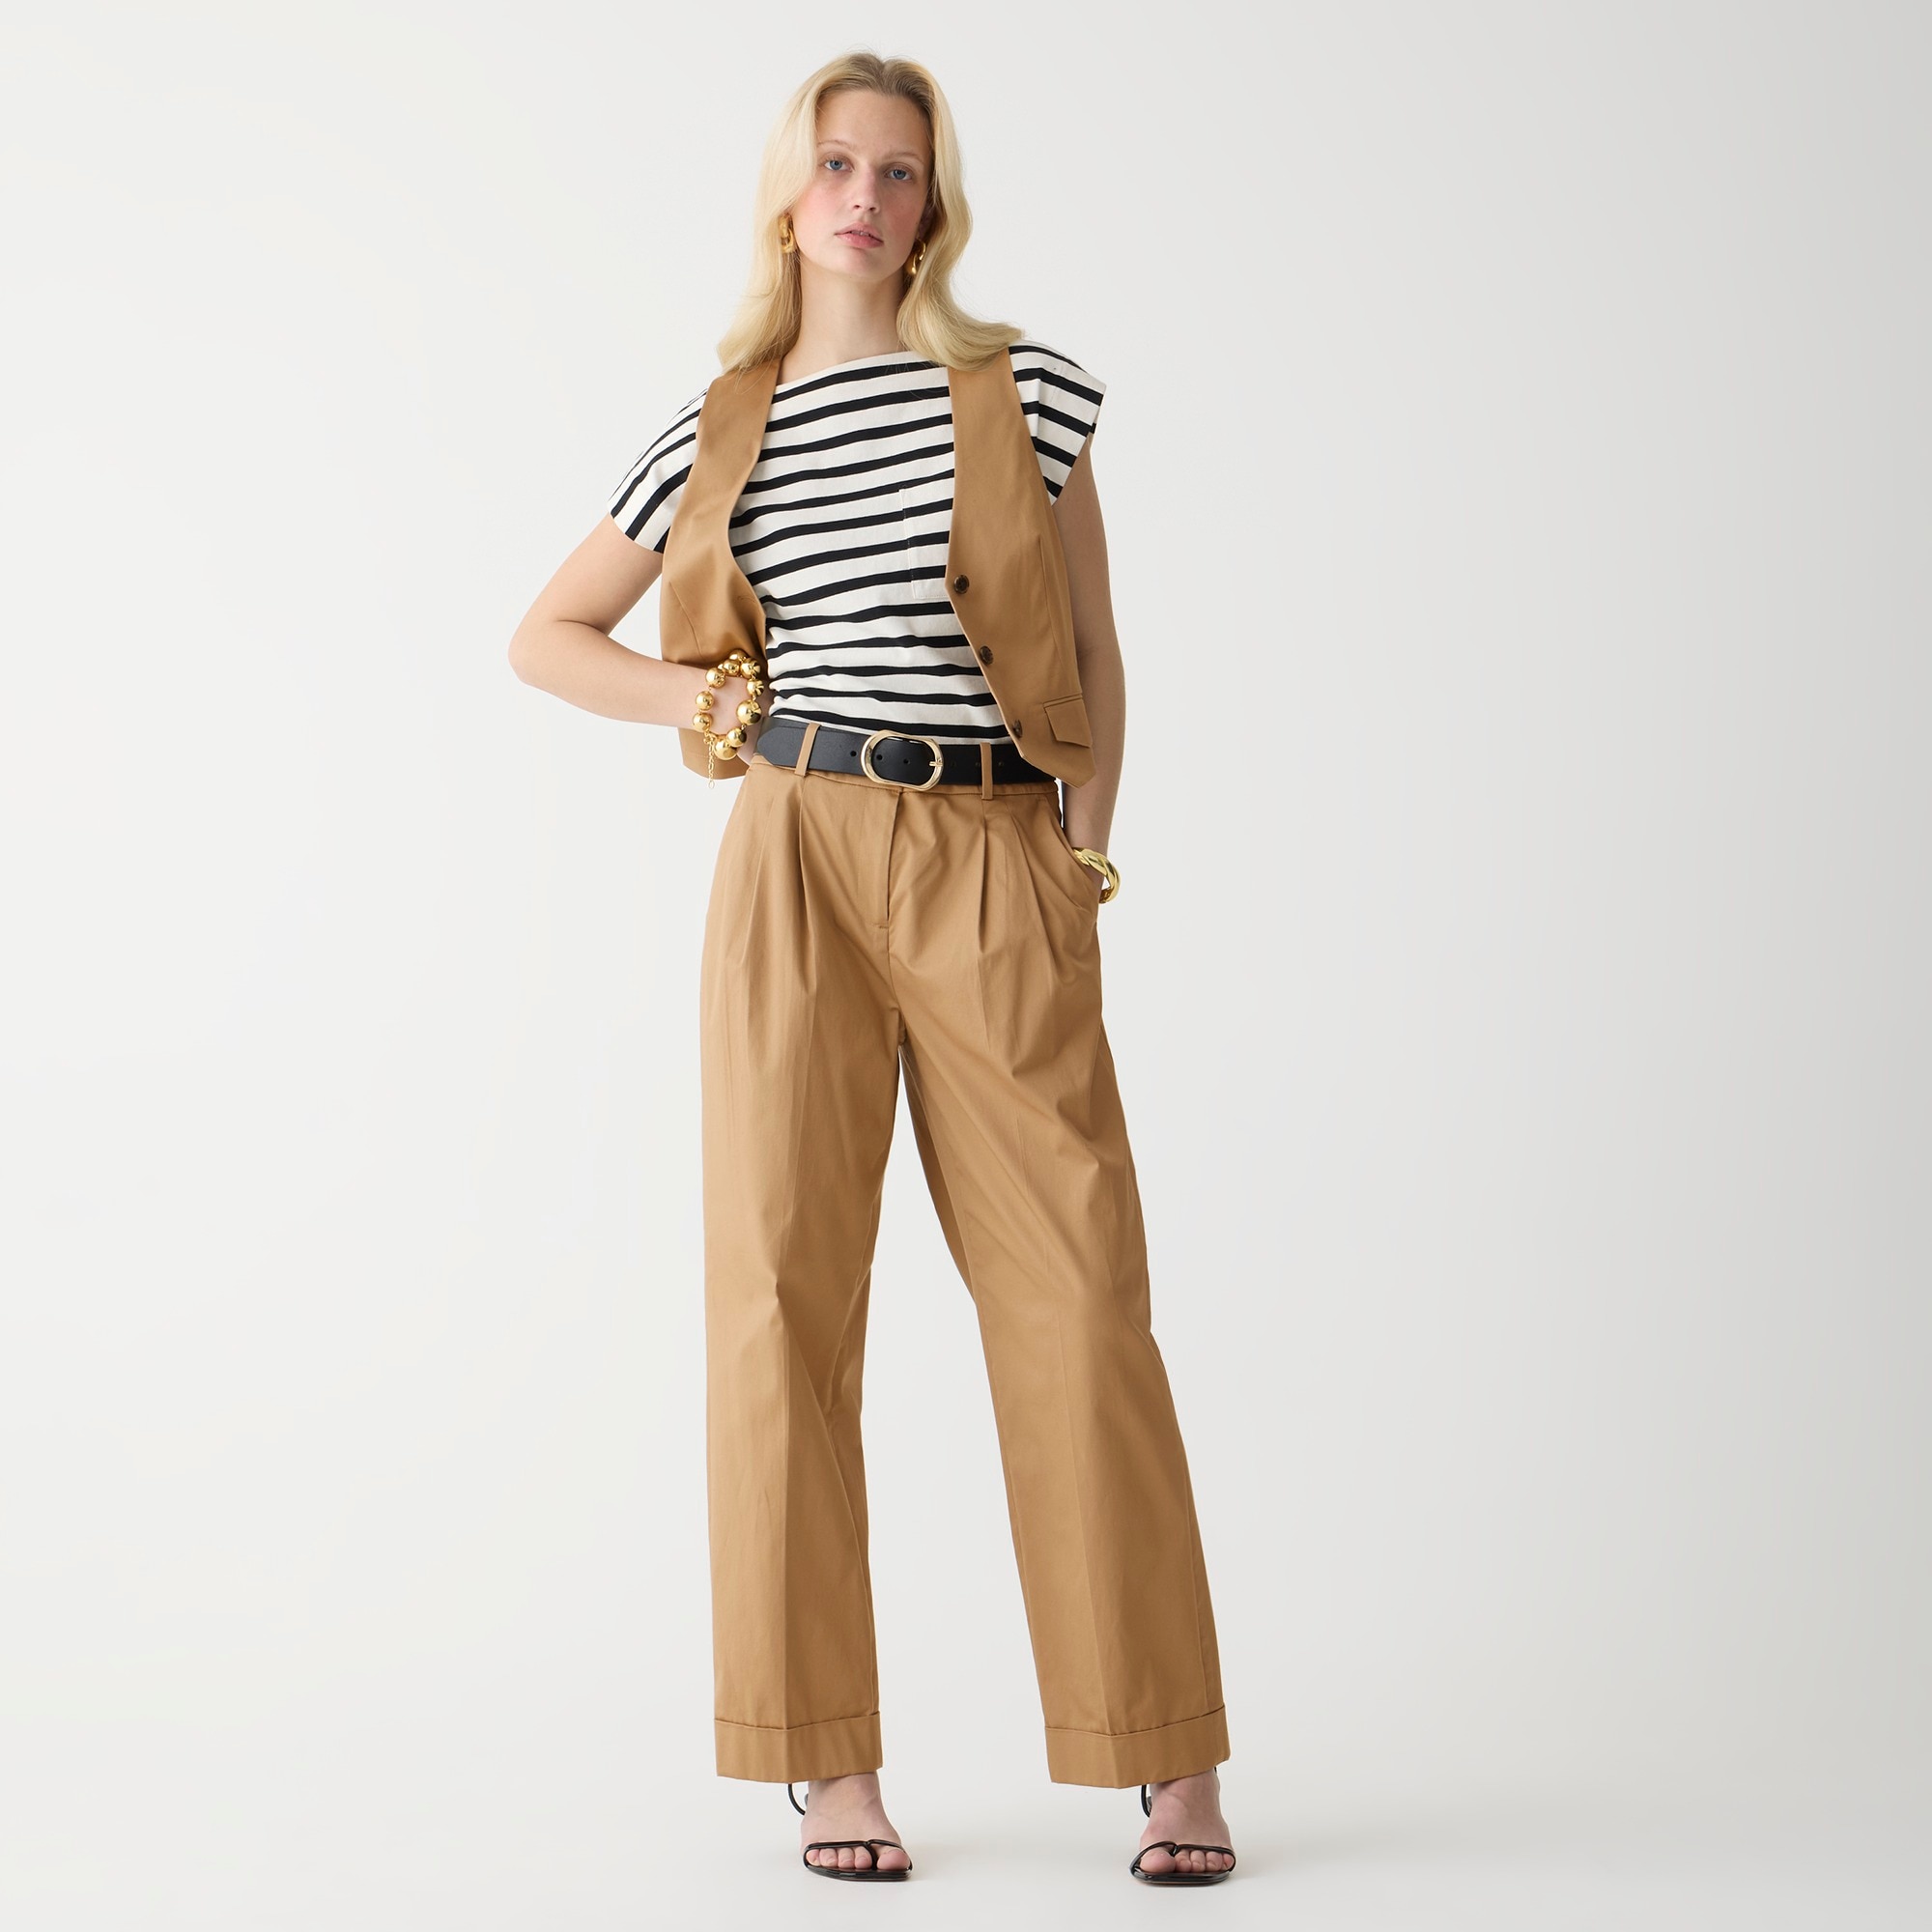  Tall wide-leg essential pant in lightweight chino